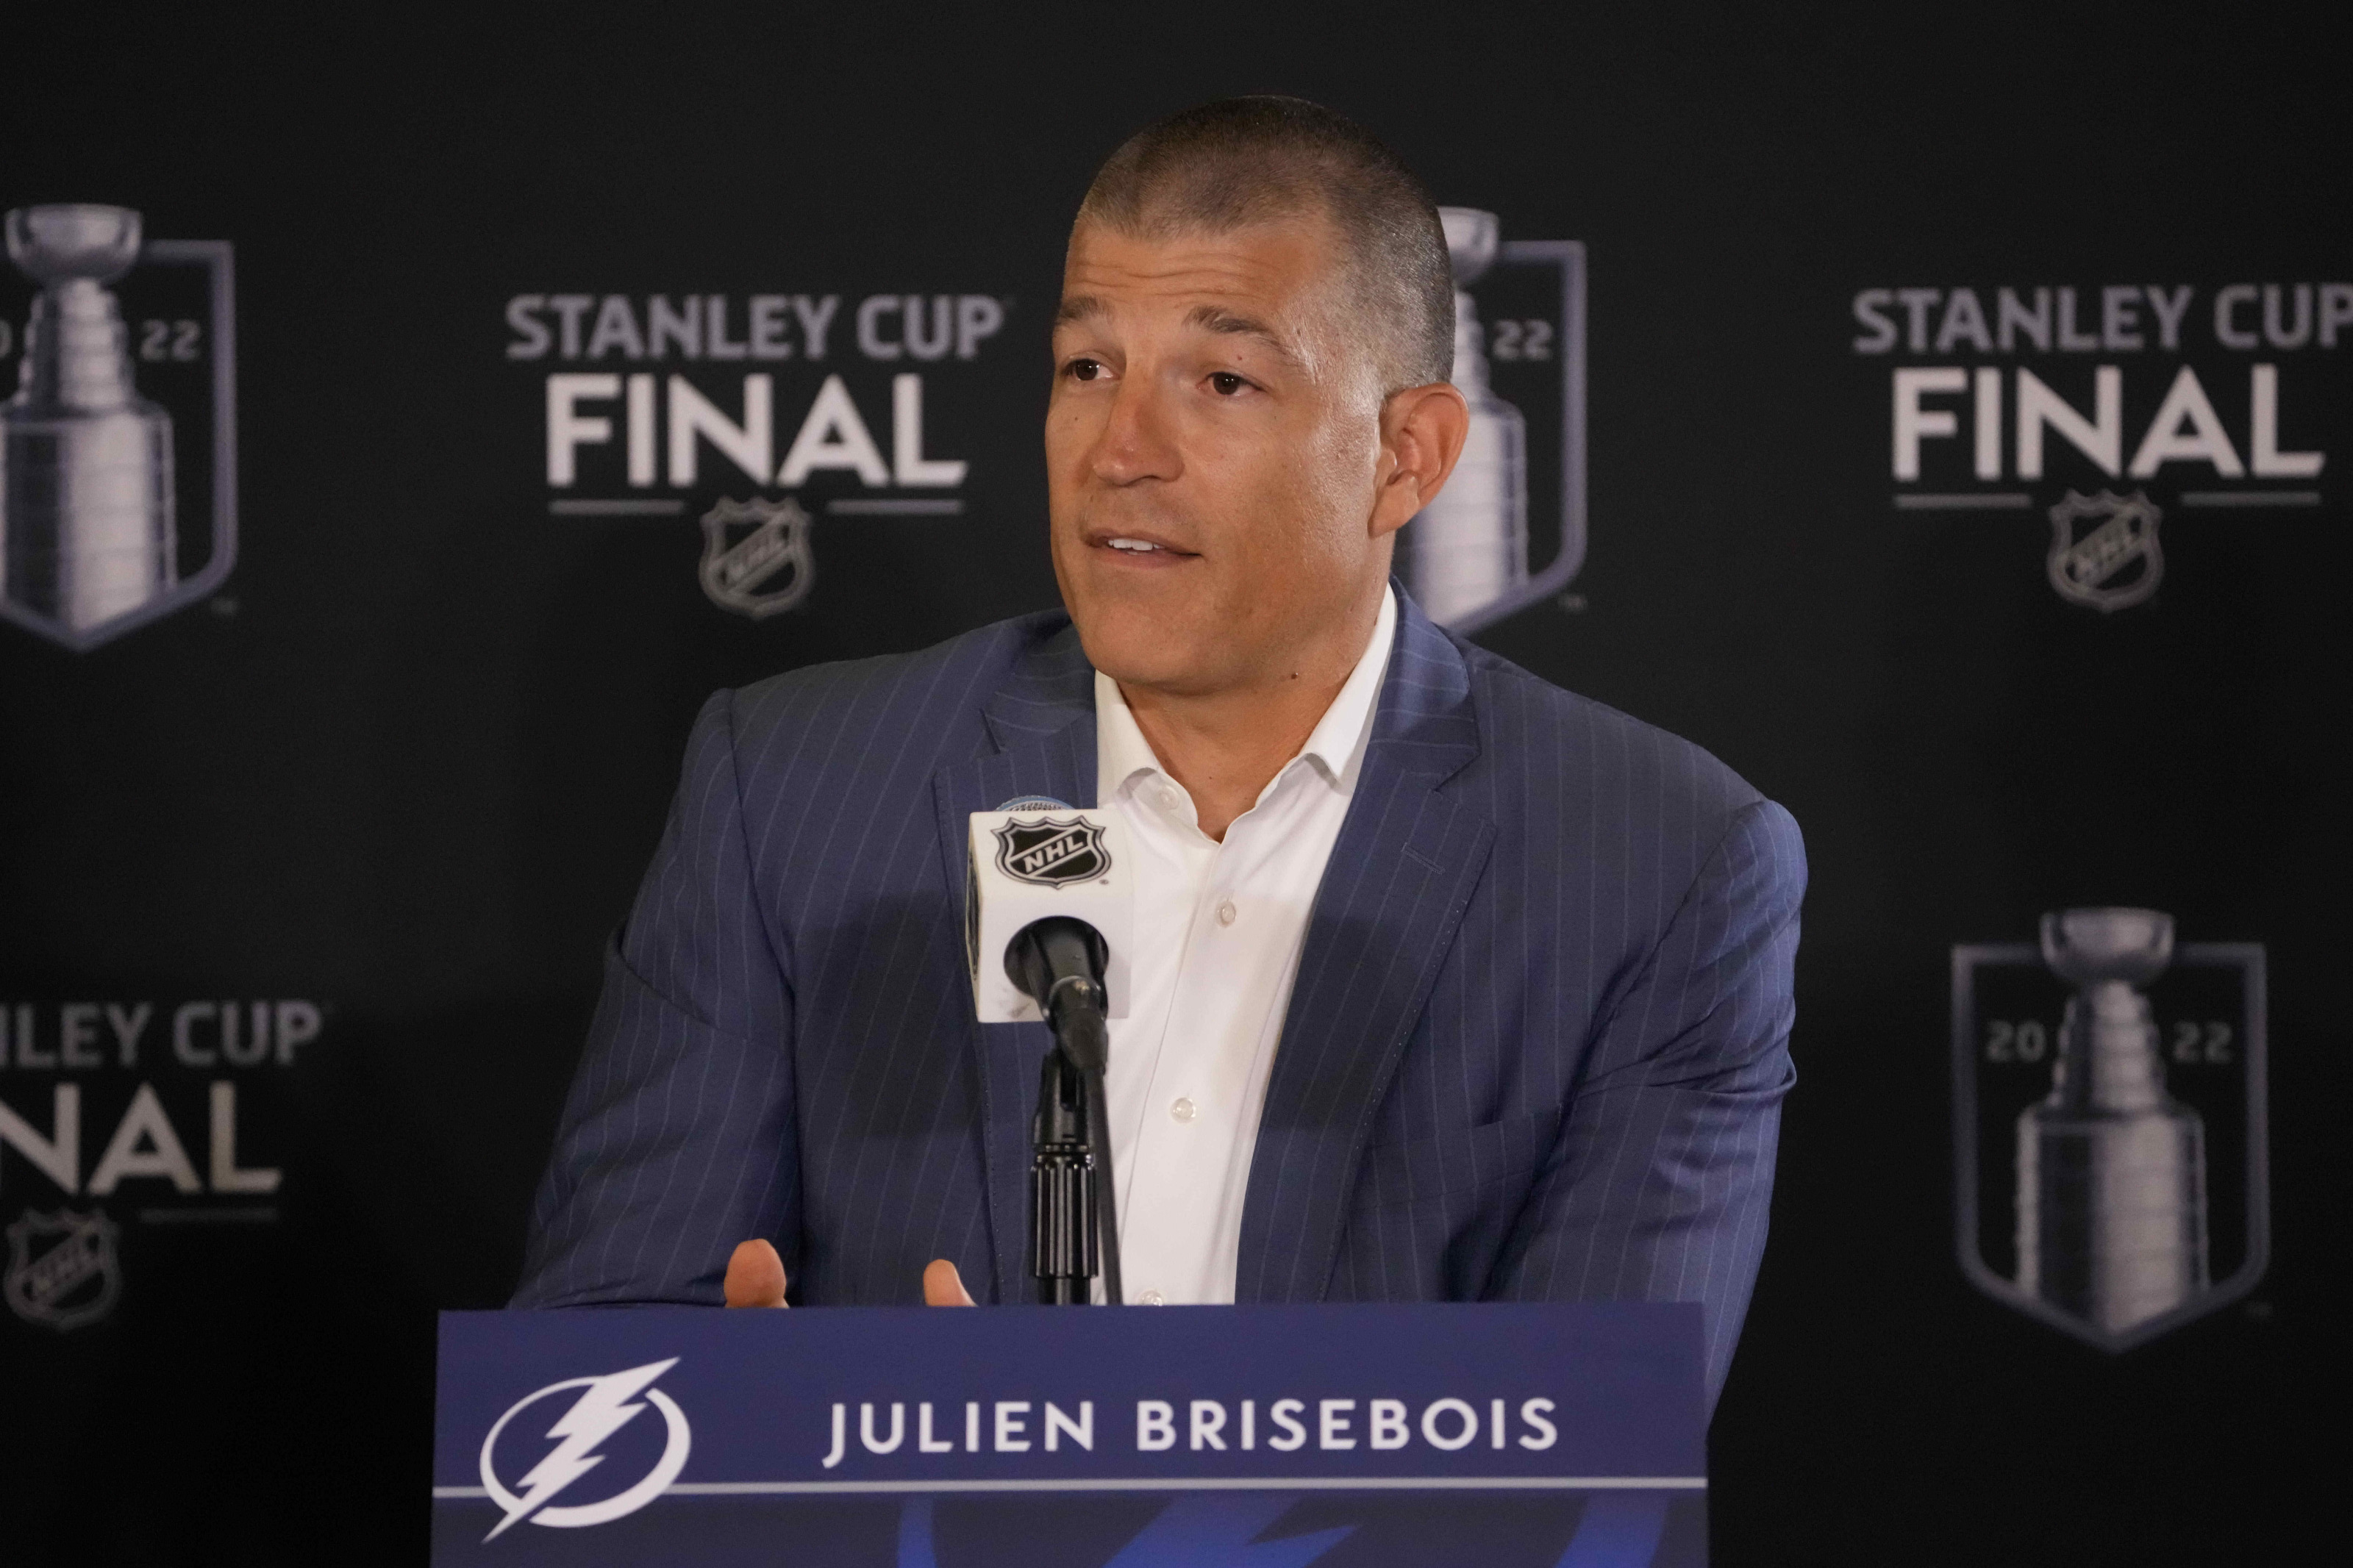 Lightning 2022 Free Agents, Draft Targets, Offseason Guide After